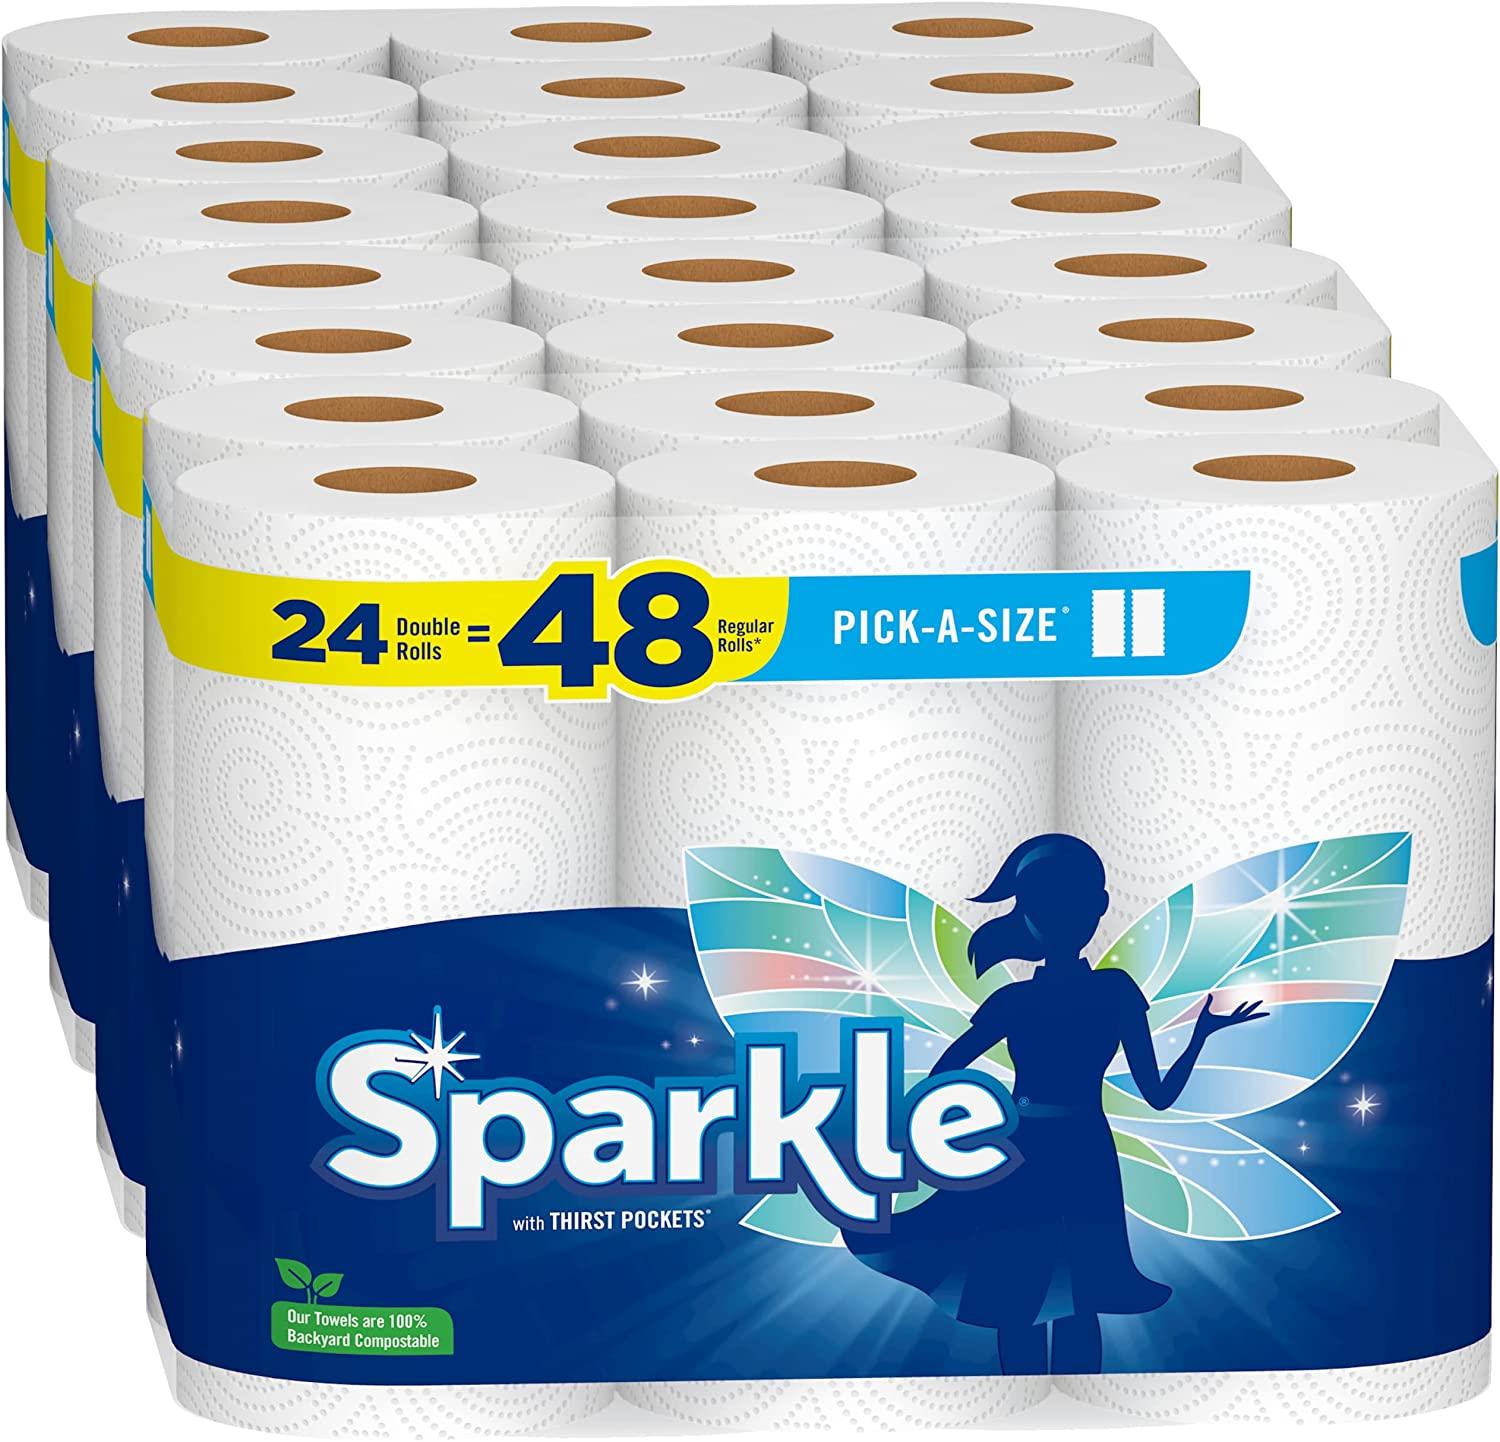 Sparkle Pick-A-Size Paper Towels Double Rolls 24 Pack for $20.77 Shipped